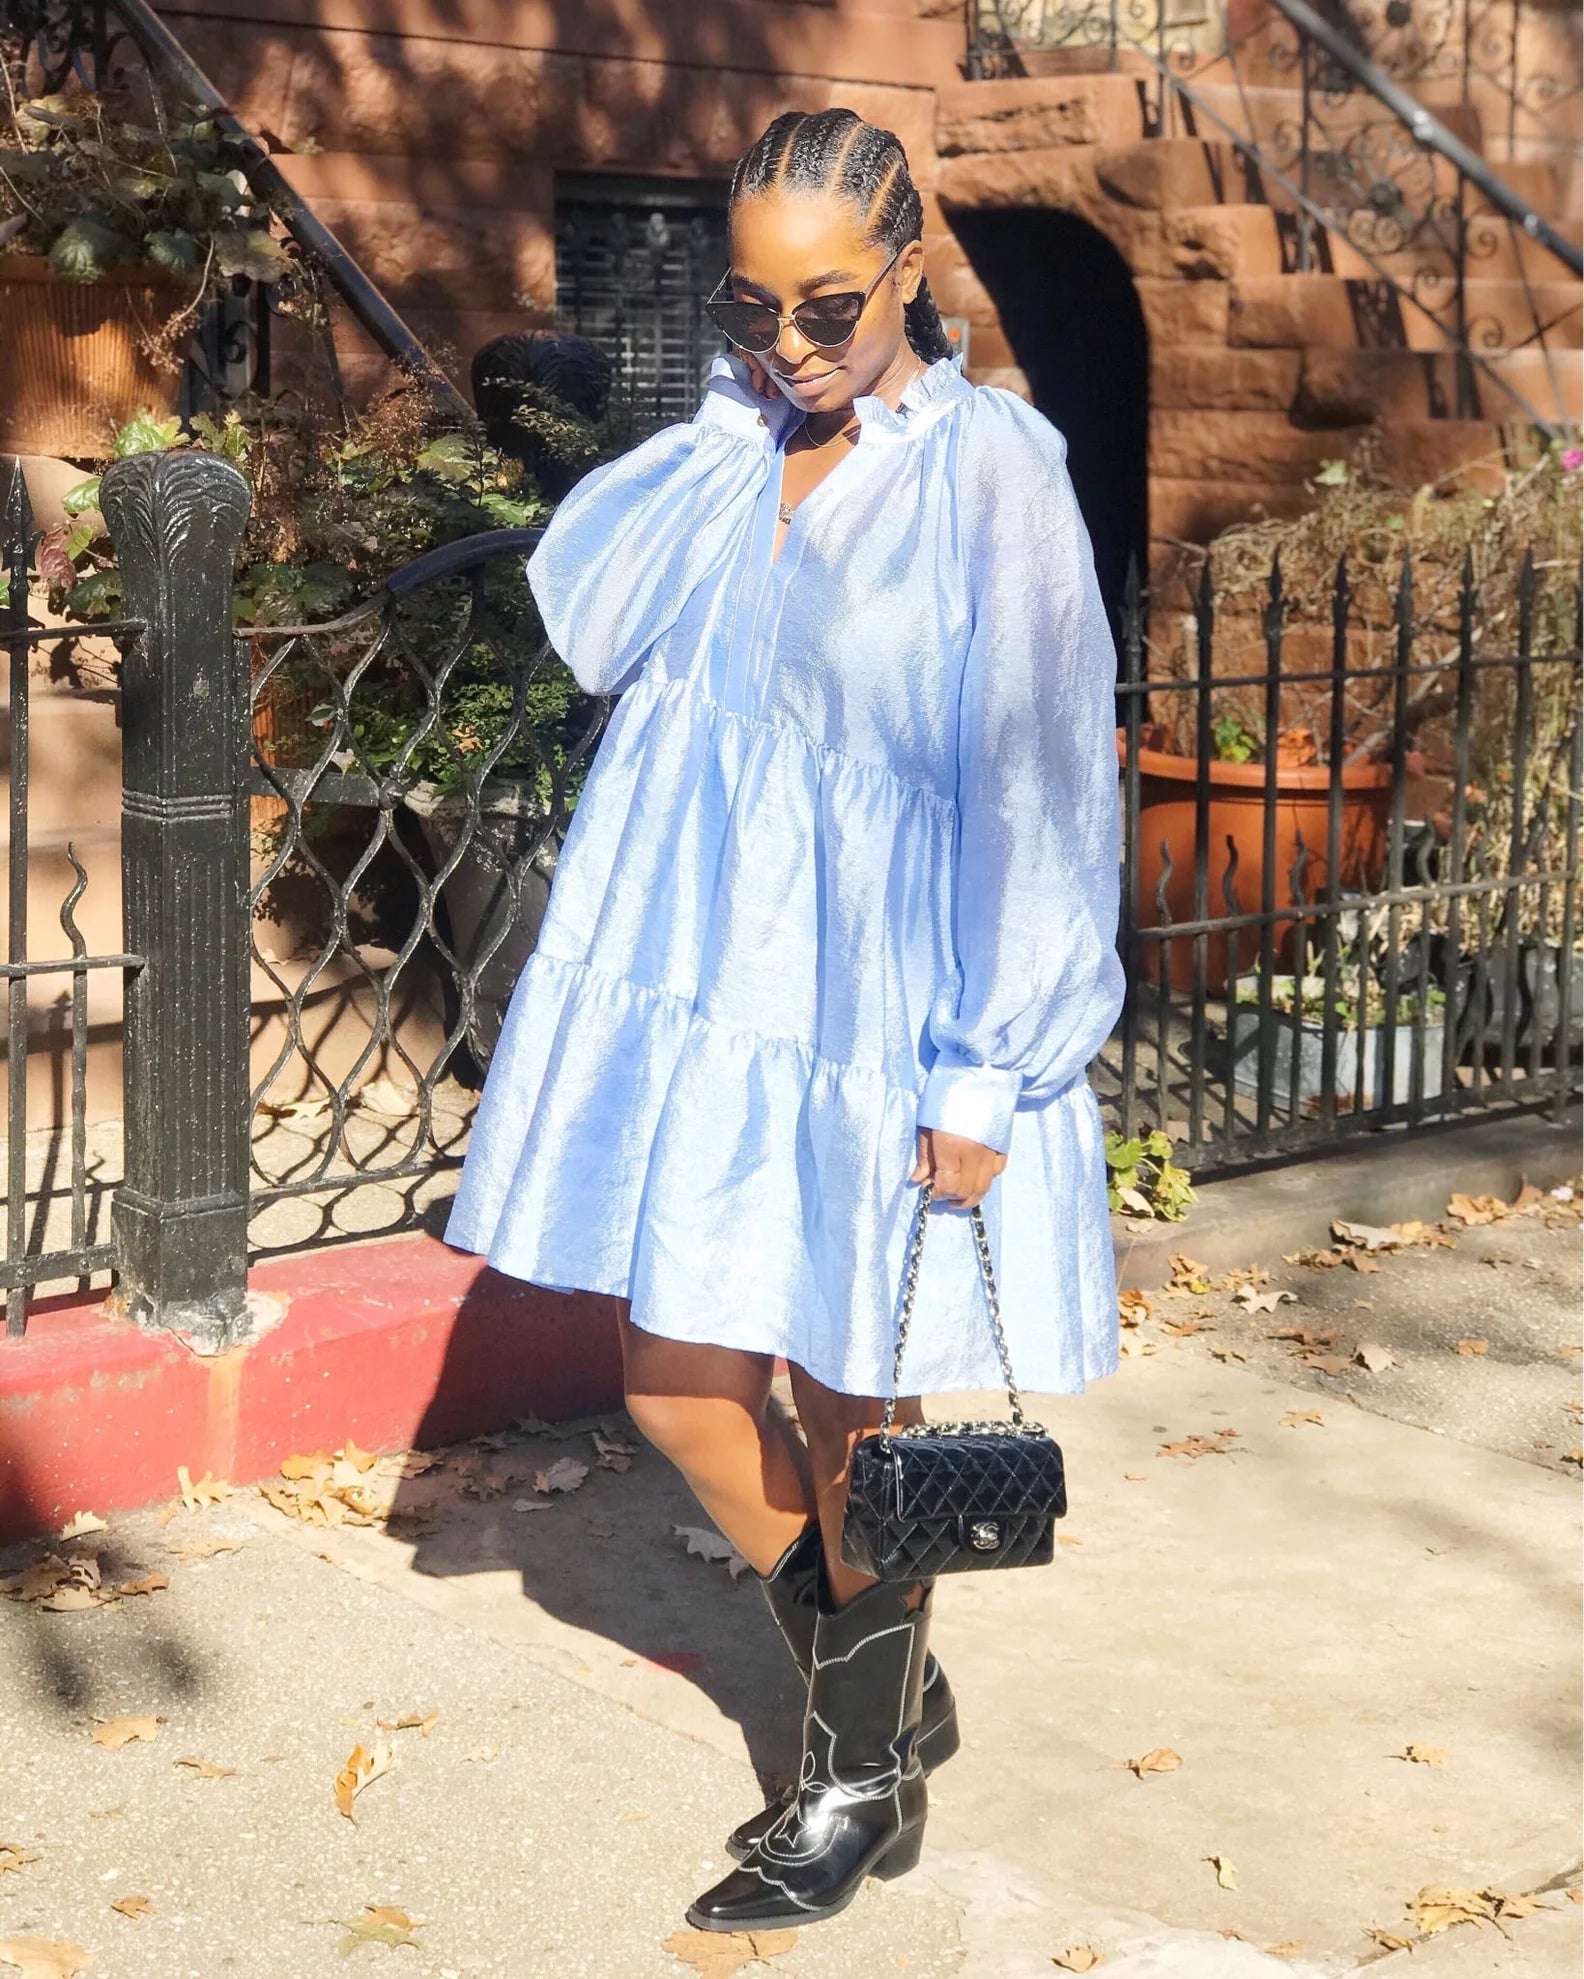 Stine Goya Jasmine Tiered Long-sleeve Shift Dress in Light Blue, available for rent. Features tiered layers and long sleeves in a soft light blue.